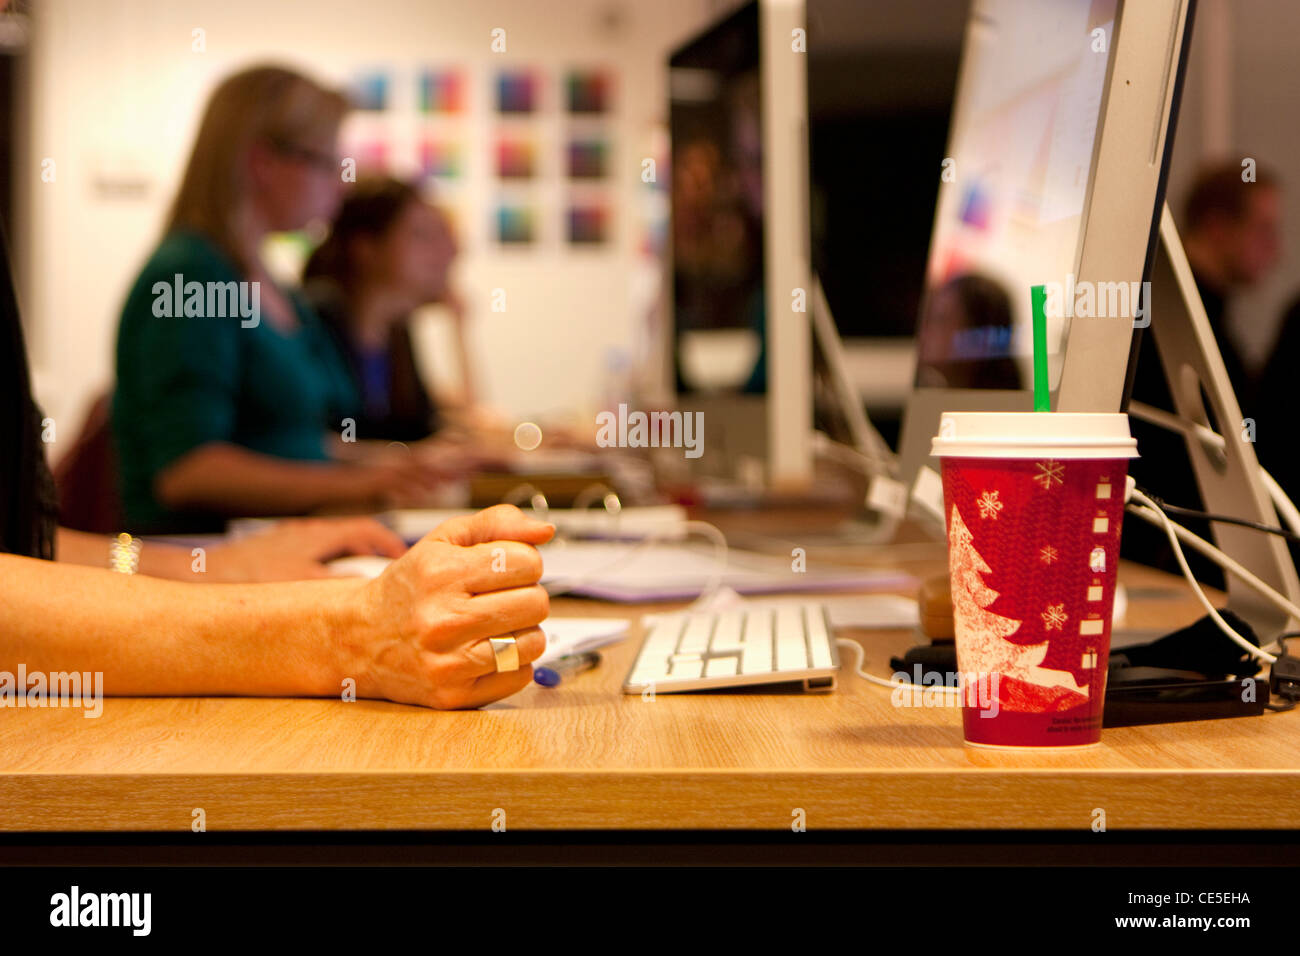 GRAPHIC DESIGN STUDIO WITH COMPUTERS AND DESIGNERS Stock Photo